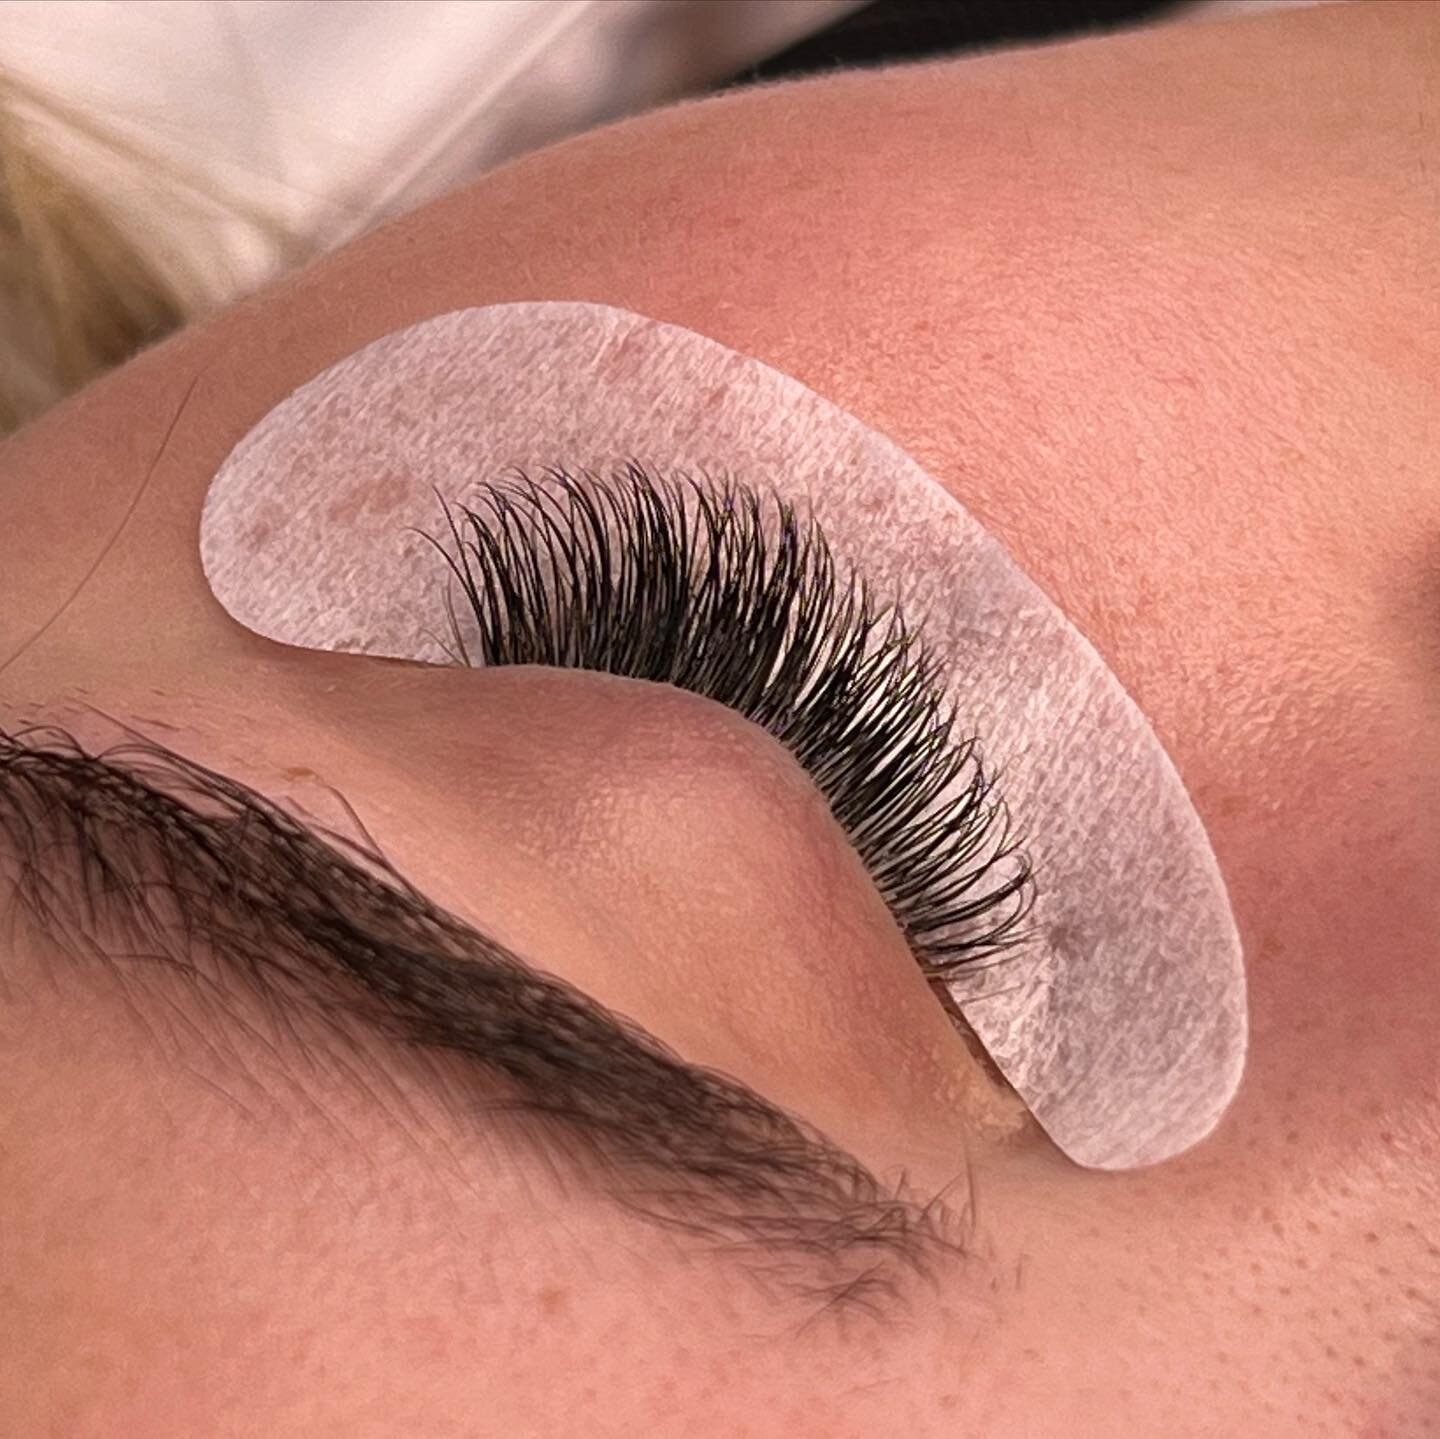 What are Classic Eyelash Extensions?! 

When applying the lashes, one singular lash is placed on one natural lash. This will add length and a slight definition, perfect for someone wanting something still on the natural side but enhancing what you&rs